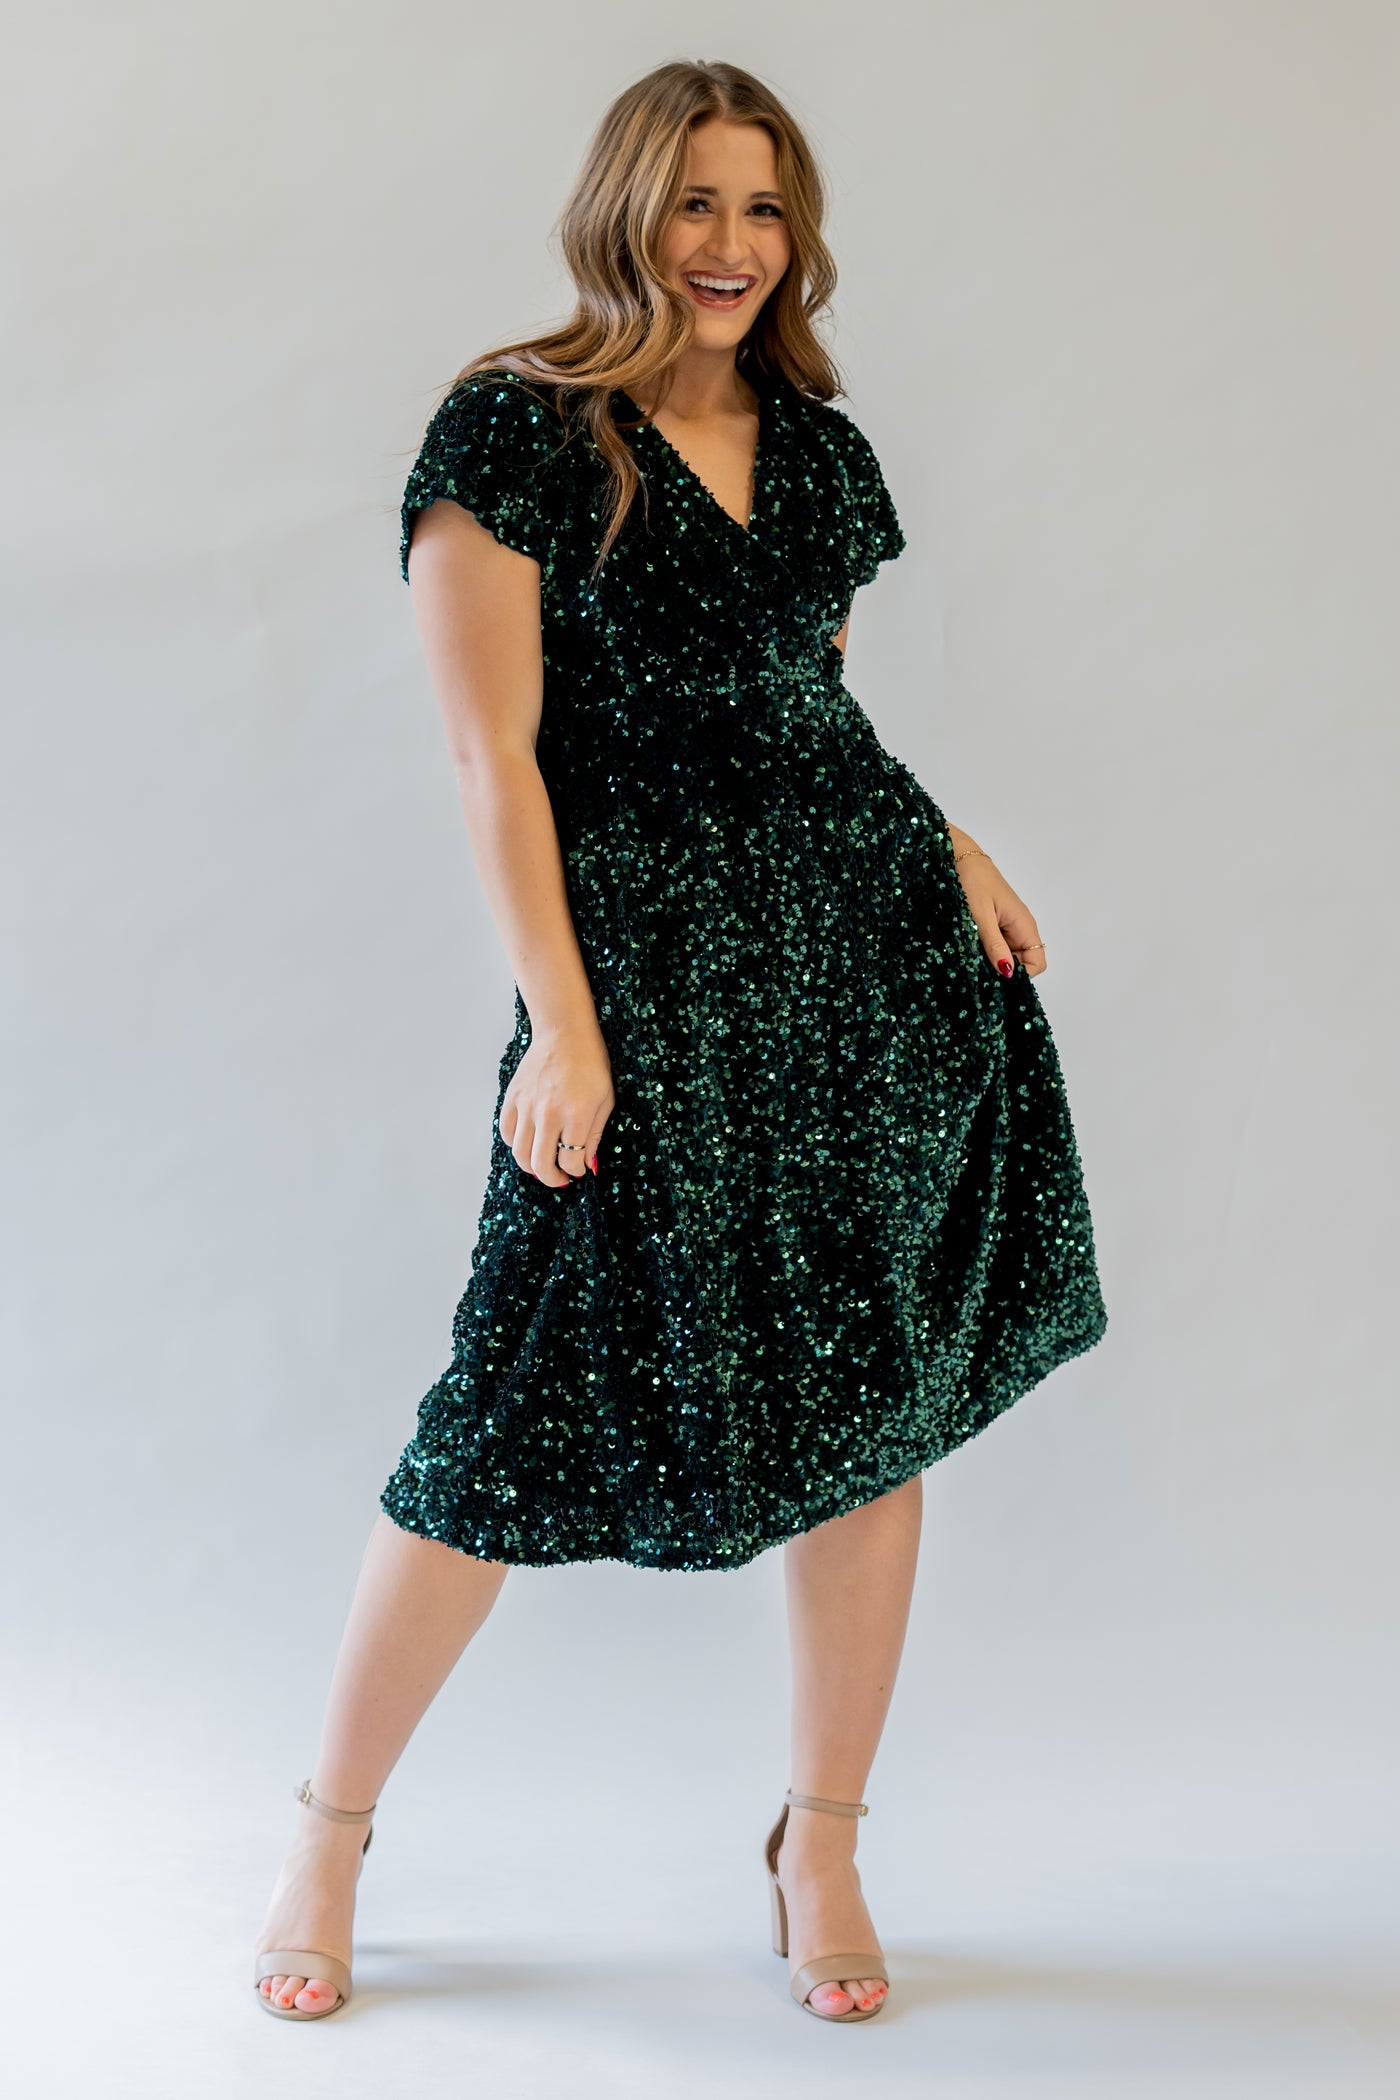 Sparkly modest bridesmaid dress with v-neckline. It is green and has sequins covering the dress. It has a higher waistline.